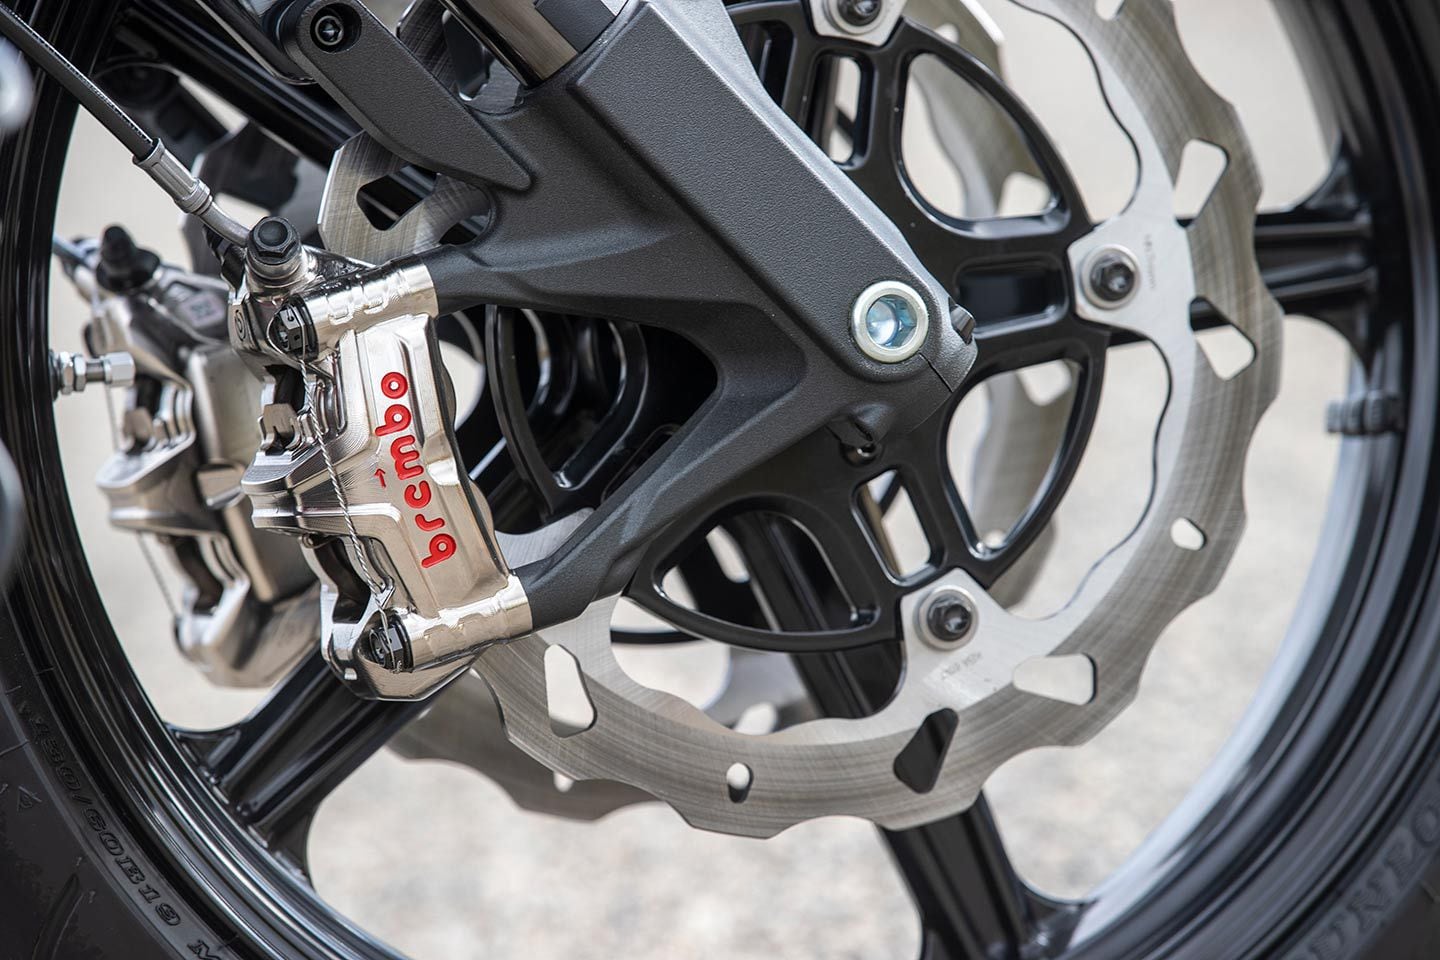 Brembo Monoblock calipers matched to Galfer rotors and a Beringer master cylinder stop the custom Sport Chief with excellent power and feedback.